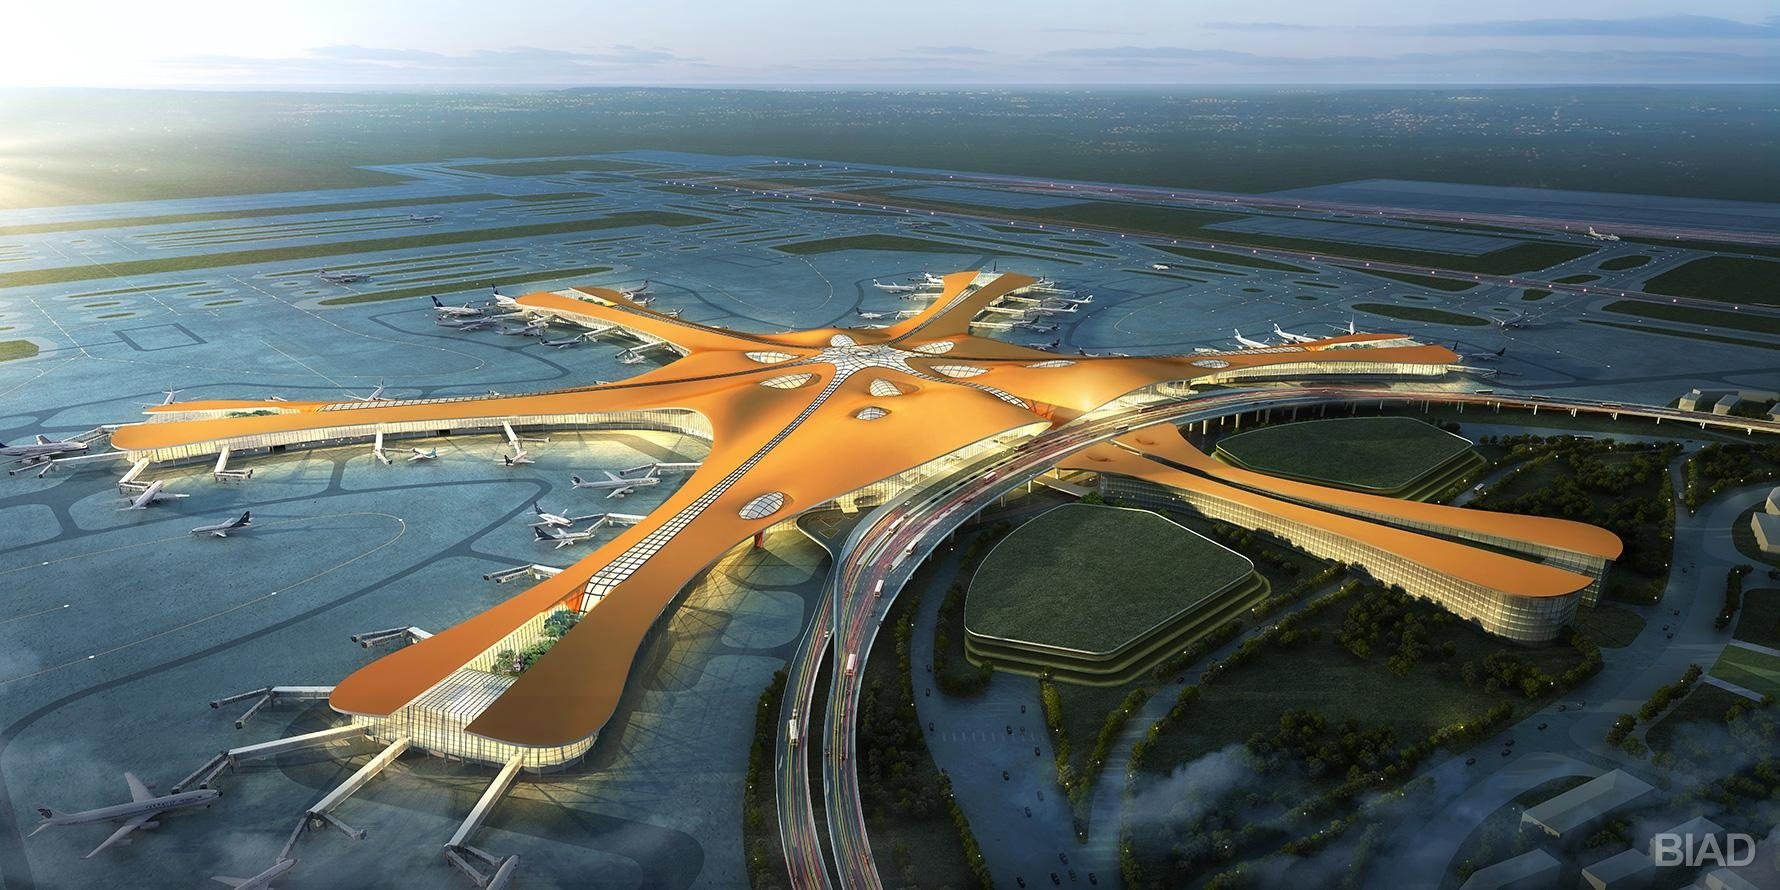 7 Facts to Know About the new Beijing Daxing International Airport